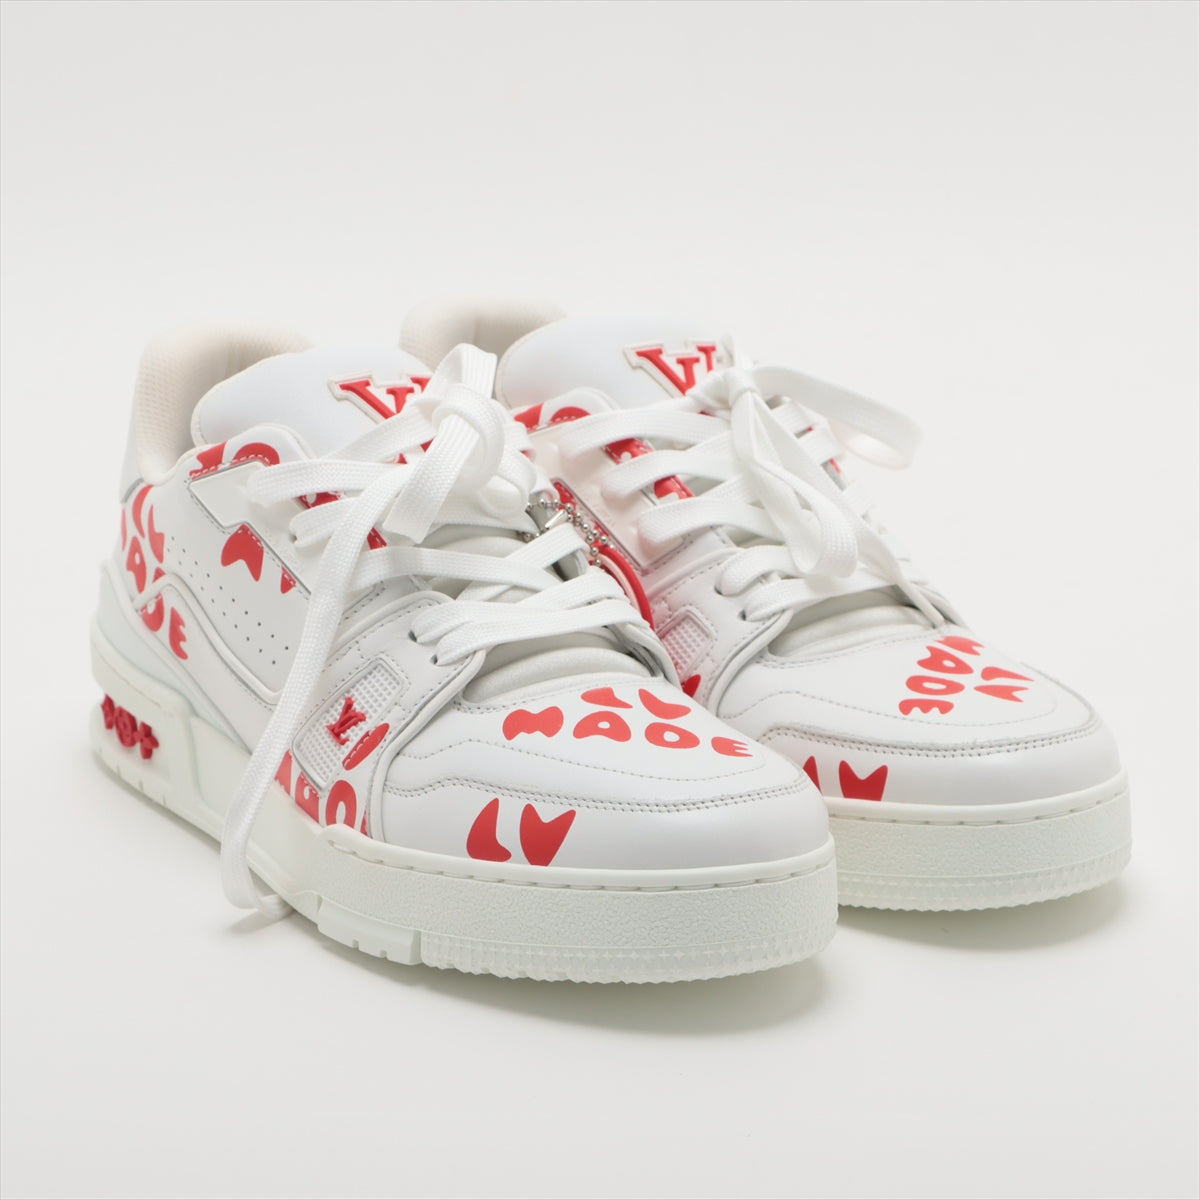 Louis Vuitton x NIGO LV Trainer Line 21 years Leather x fabric Sneakers 4 Unisex Red x white FD0291 LV Logo